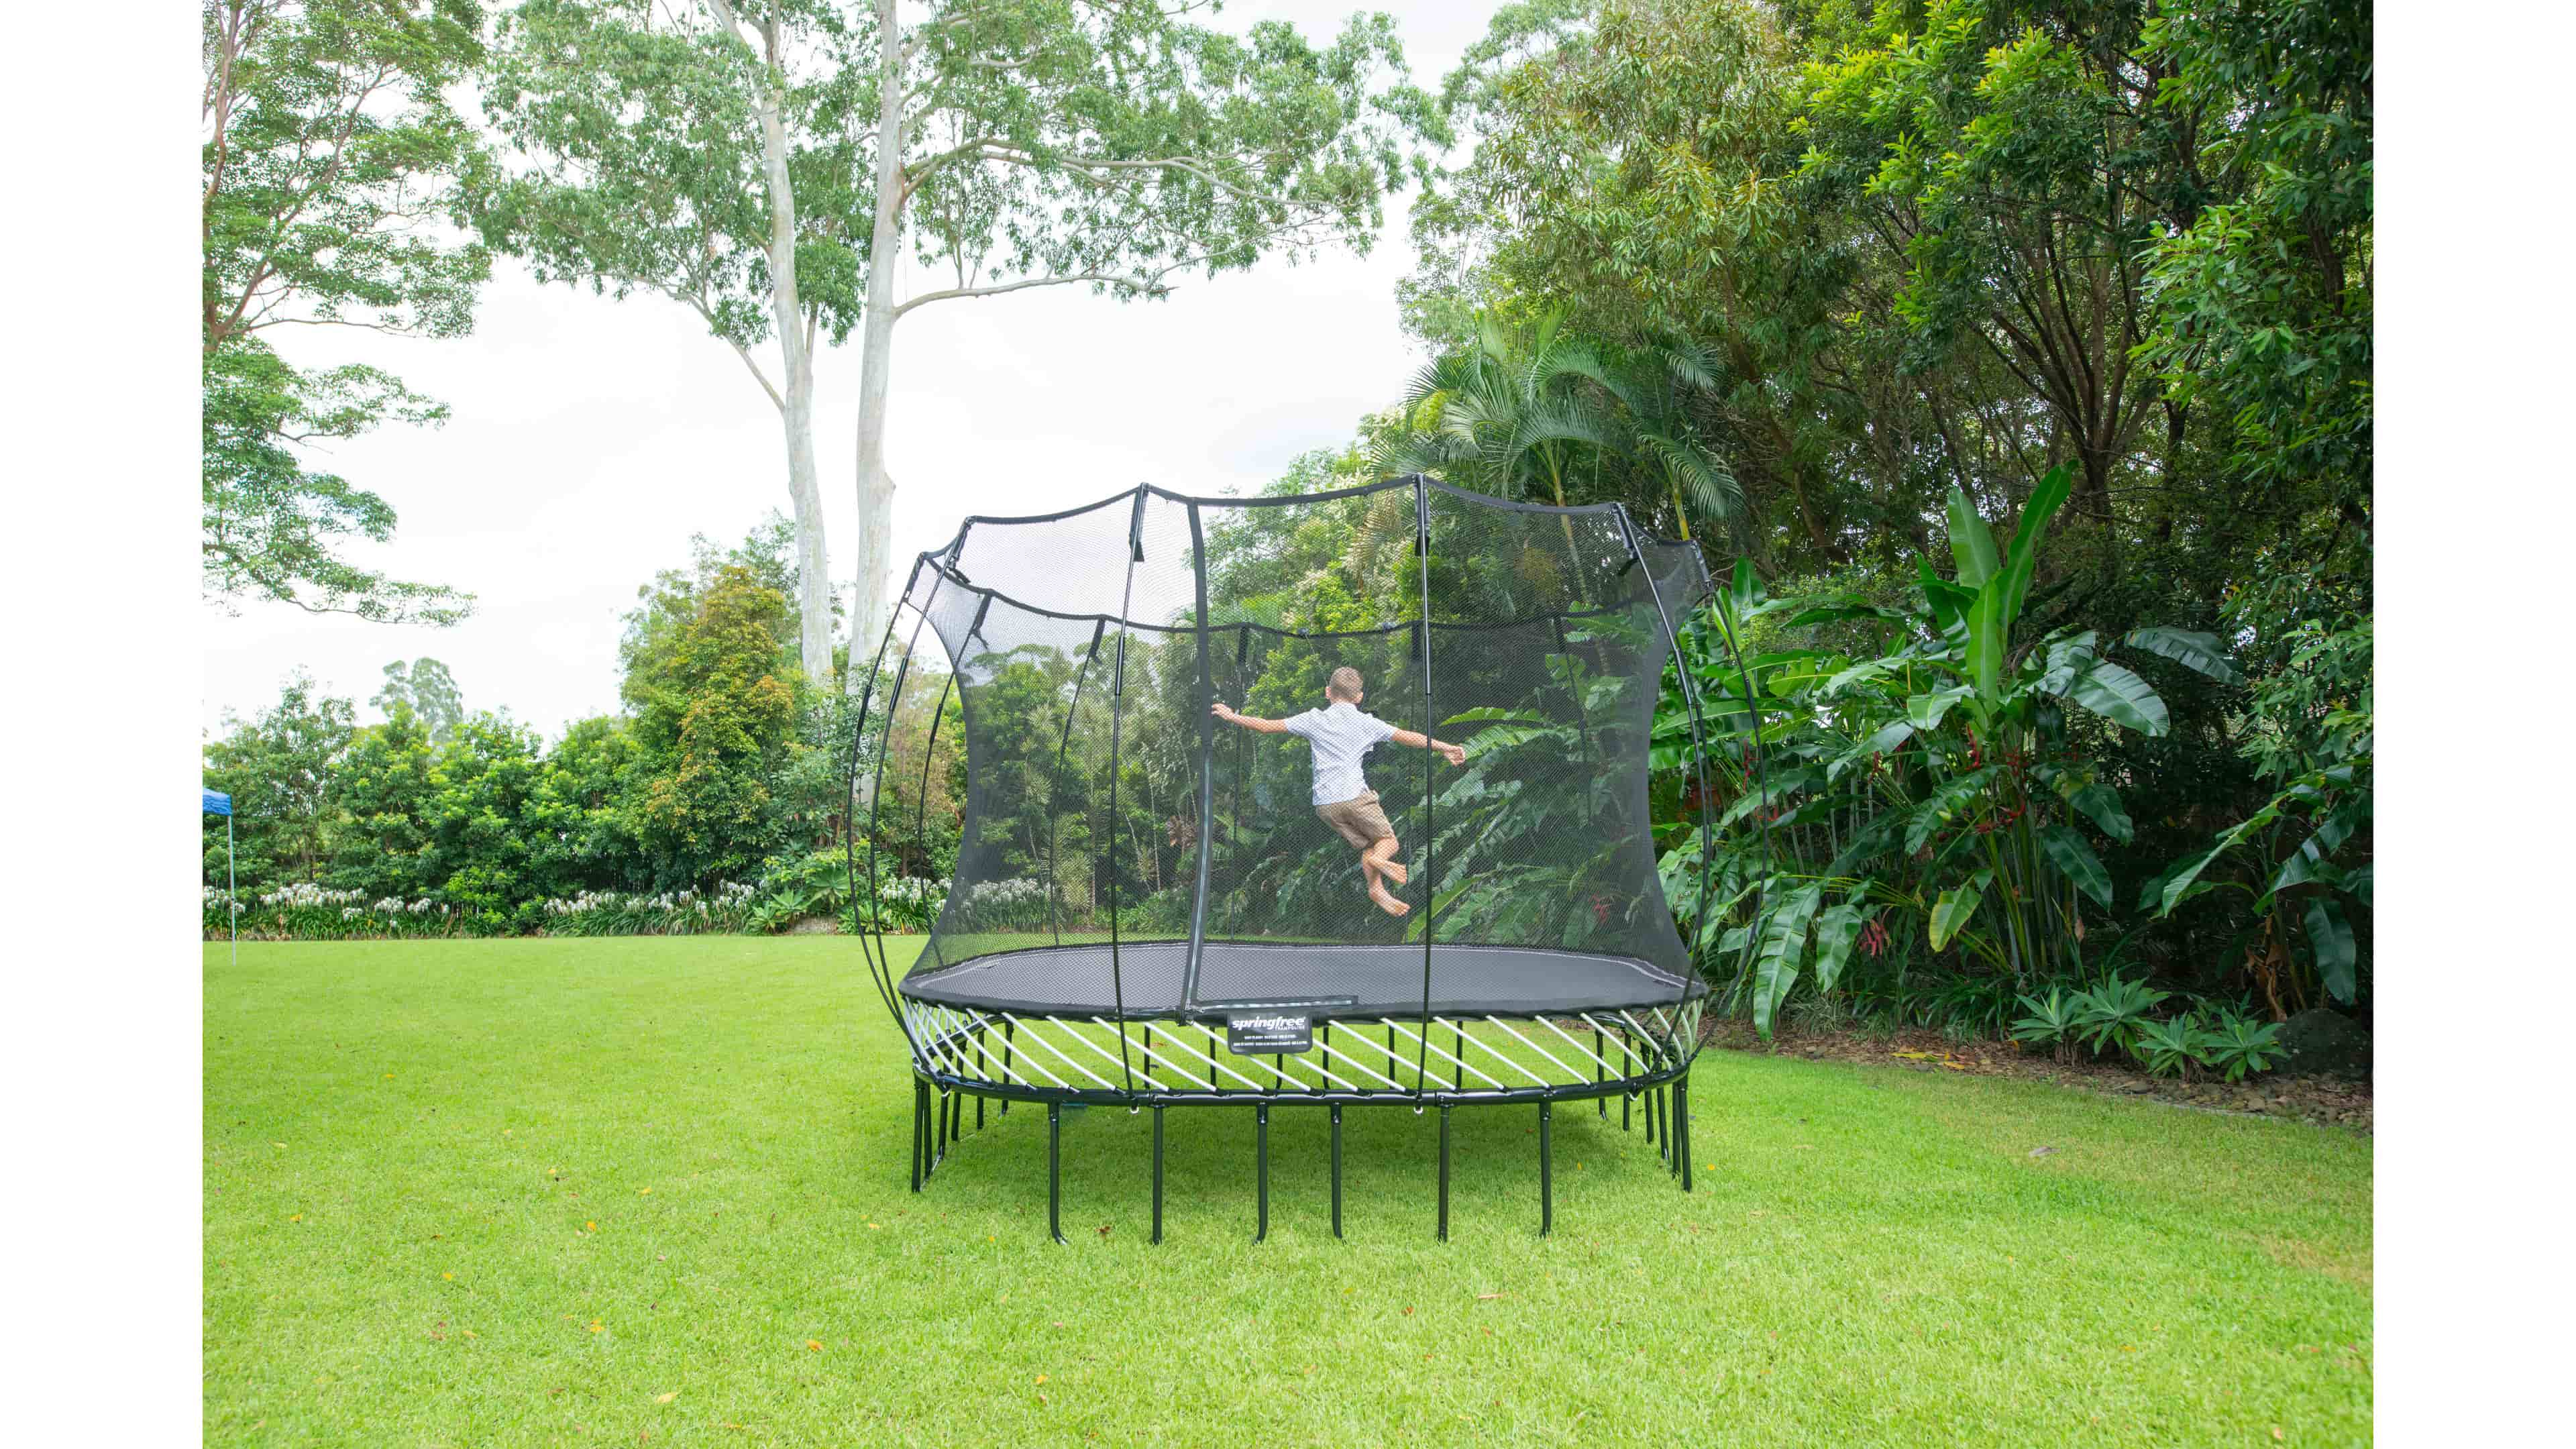 Is a 12 ft Trampoline Big Enough? | Expert Analysis